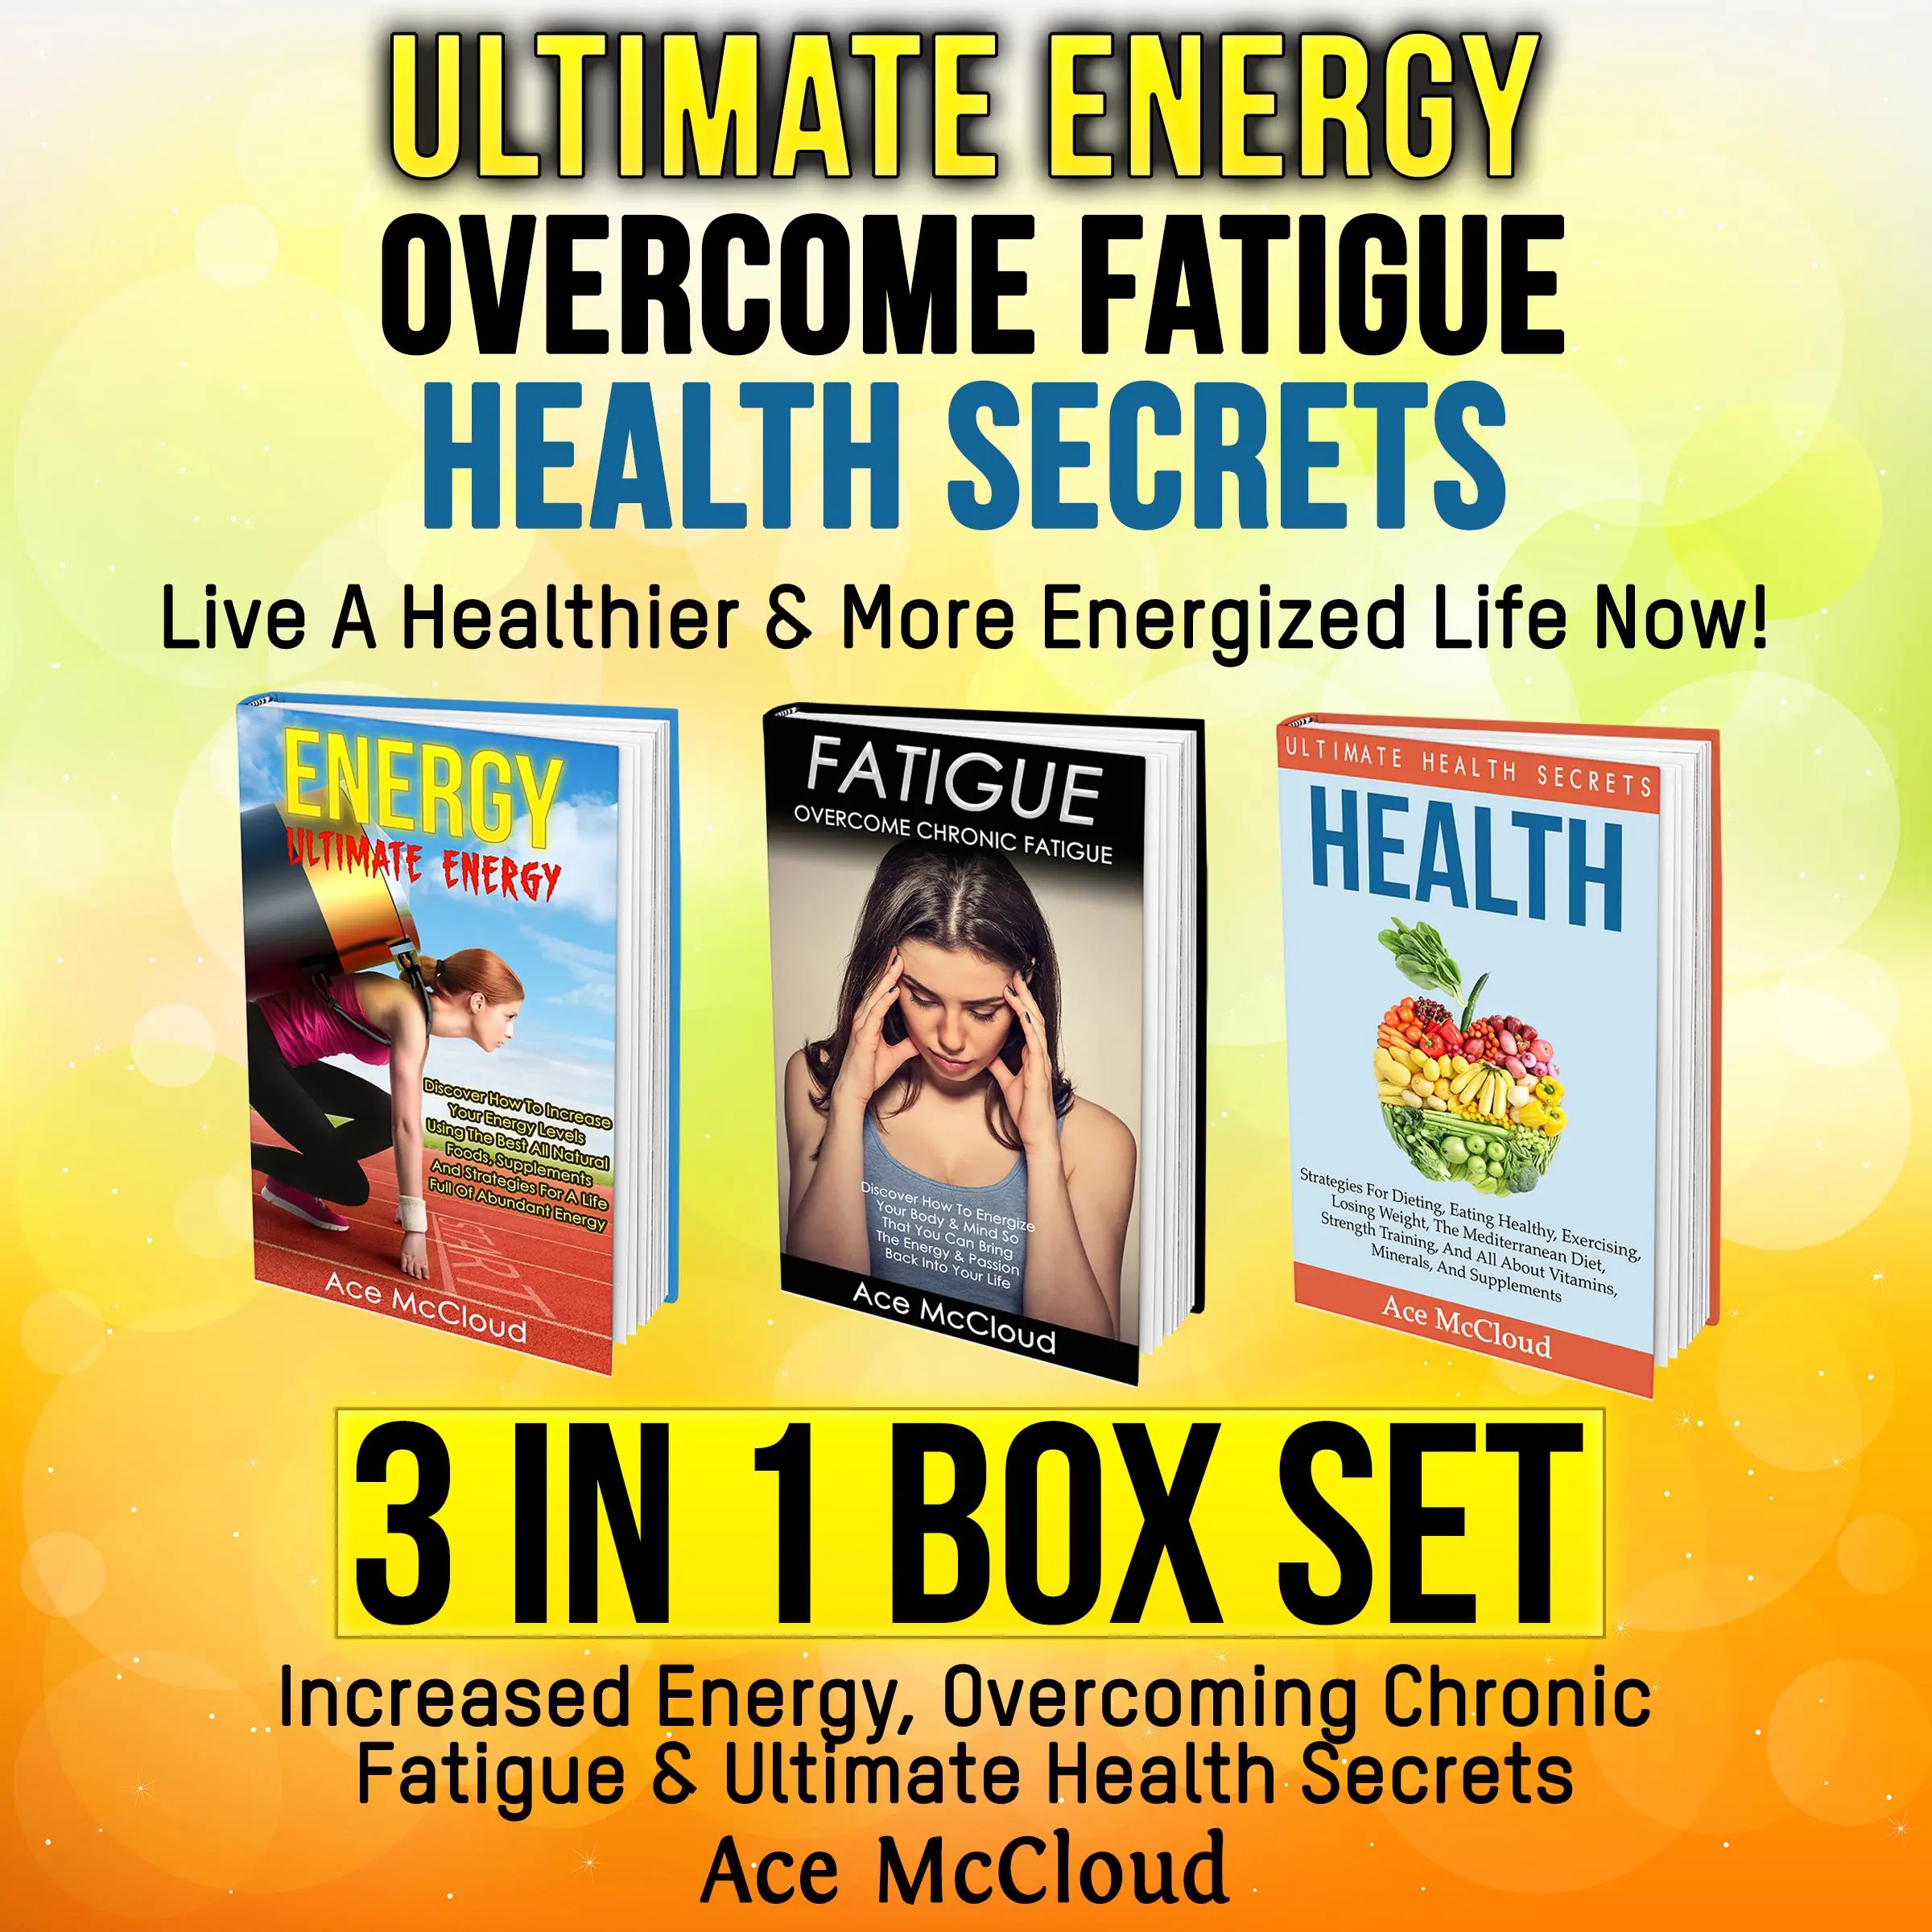 Ultimate Energy: Overcome Fatigue: Health Secrets: Live A Healthier & More Energized Life Now!: 3 in 1 Box Set: Increased Energy, Overcoming Chronic Fatigue & Ultimate Health Secrets Audiobook by Ace McCloud